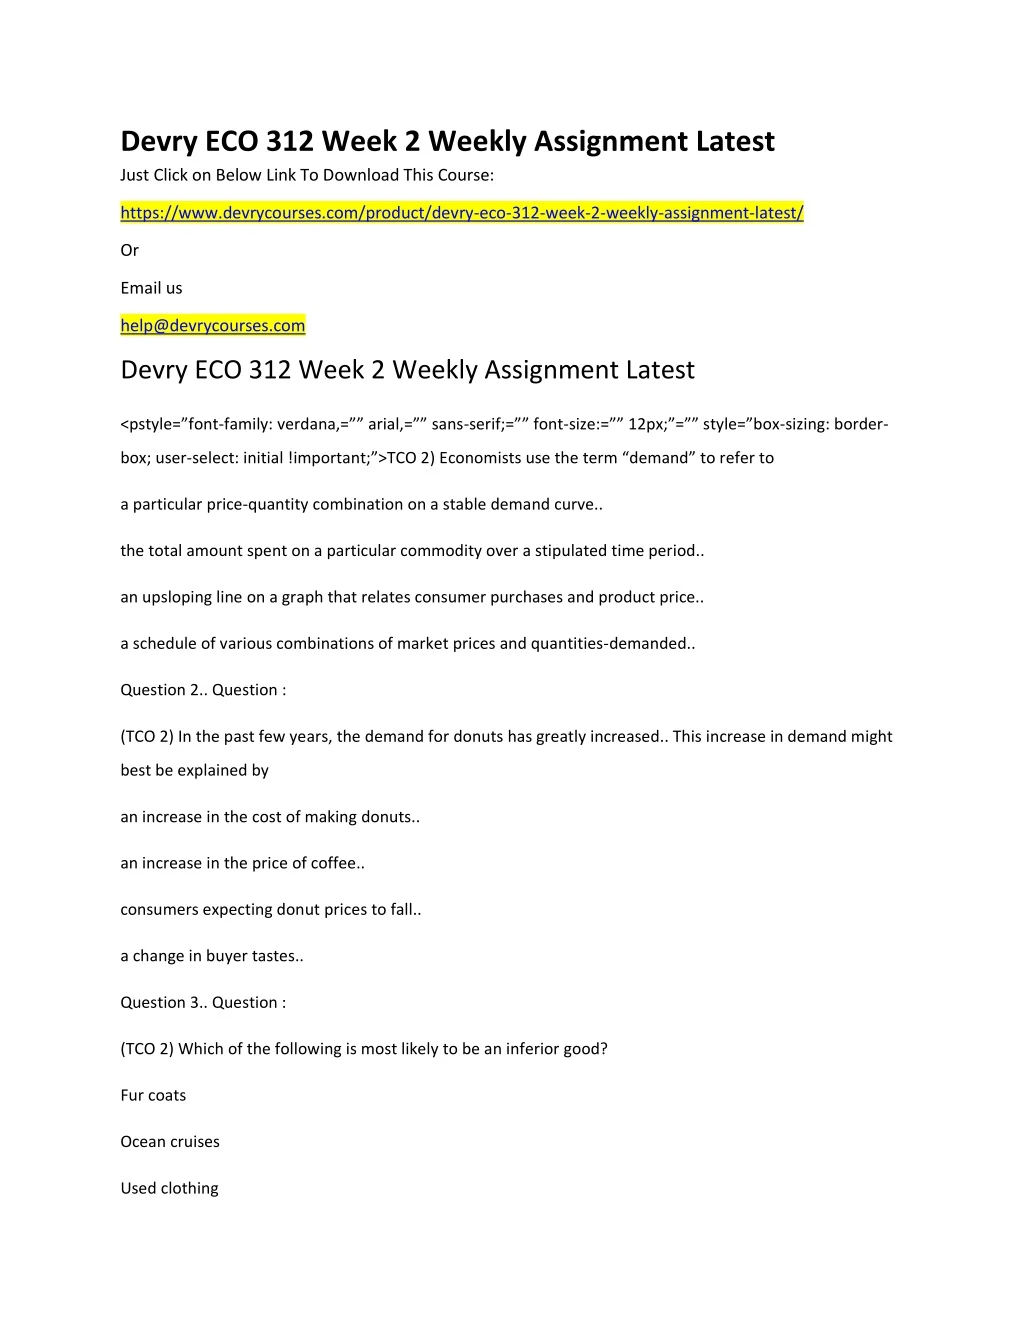 devry eco 312 week 2 weekly assignment latest